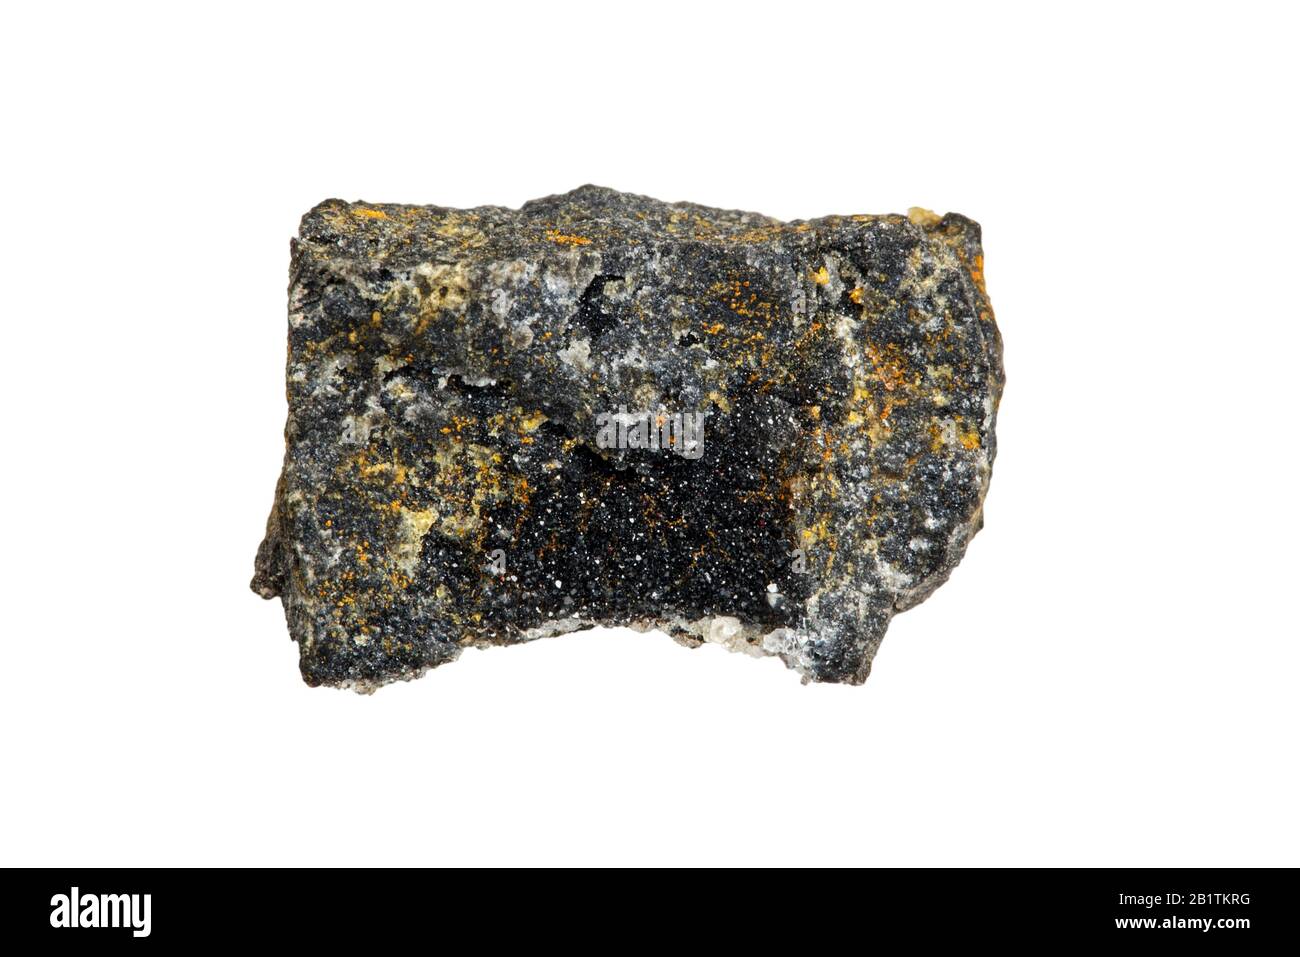 Galena / lead glance, natural mineral form of lead sulfide, found in Plombières, Belgium against white background Stock Photo